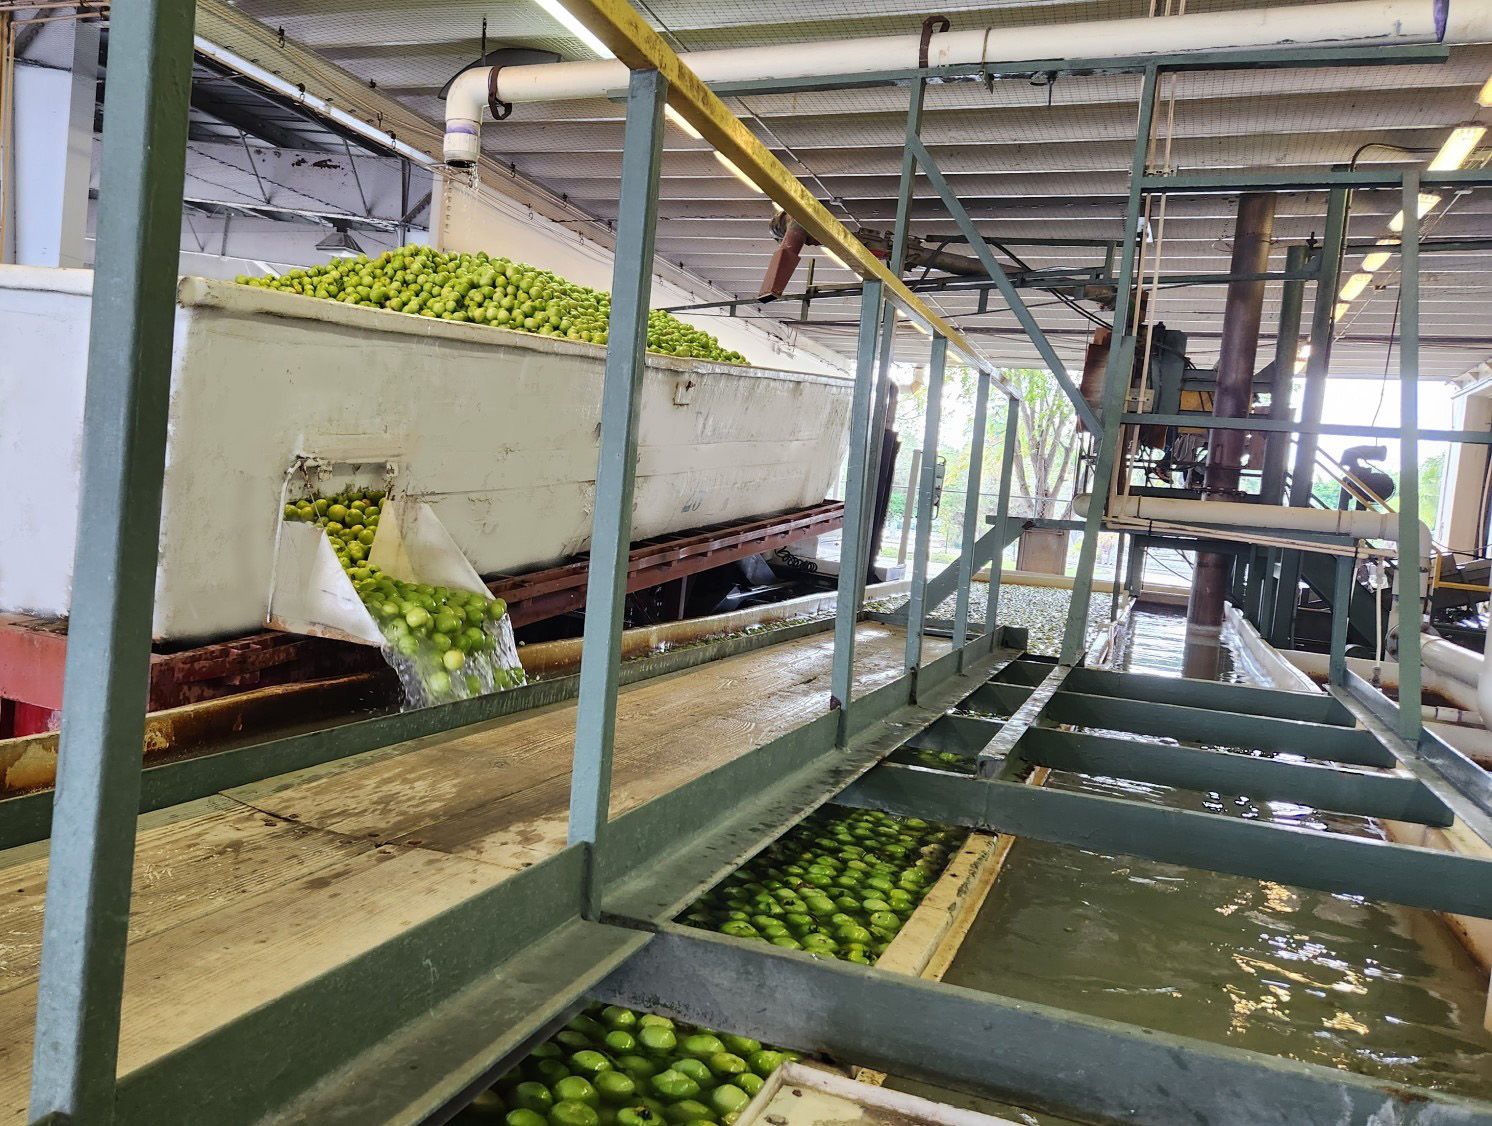 Tomatoes are transferred from gondolas by pumping dump- tank water into the gondola and fluming them out through a side chute into the dump tank.